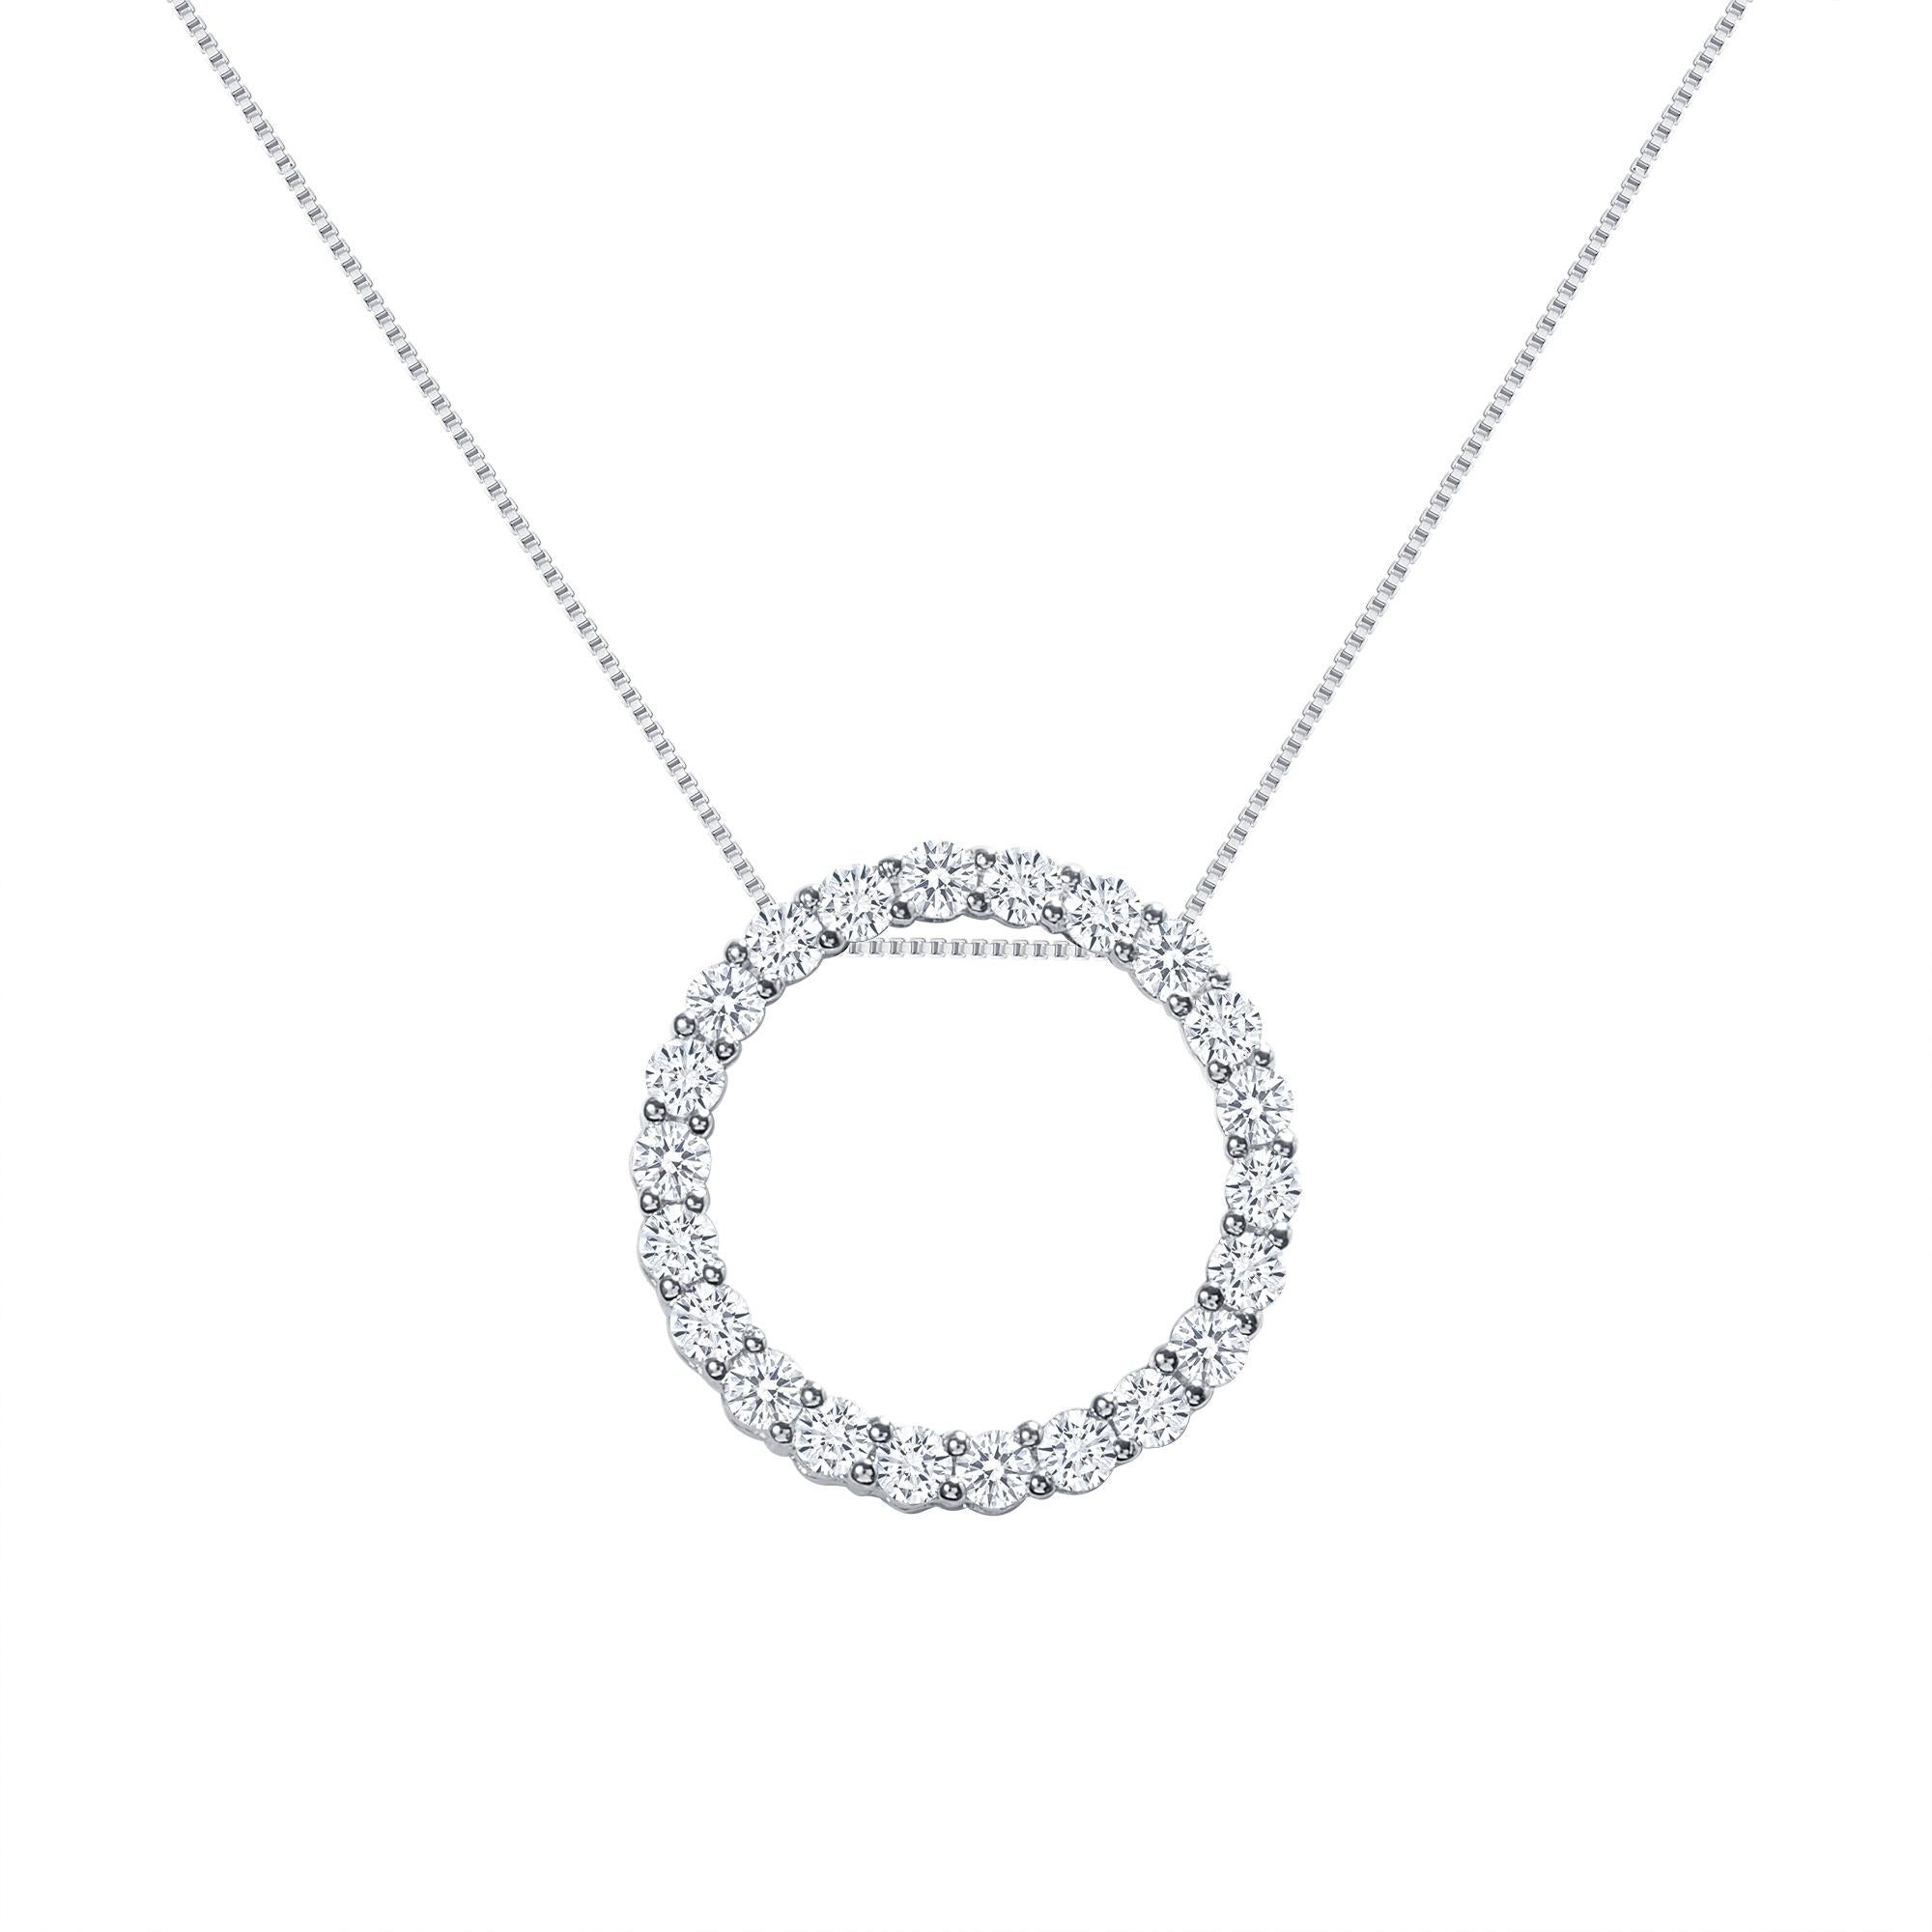 This diamond circle pendant provides a glowing chic look.
Metal: 14k Gold
Diamond Total Carats: 1 carat
Diamond Cut: Round Natural Diamonds (Not Lab Grown)
Diamond Clarity: VS
Diamond Color: F-G
Color: White Gold
Necklace Length: 20 inches